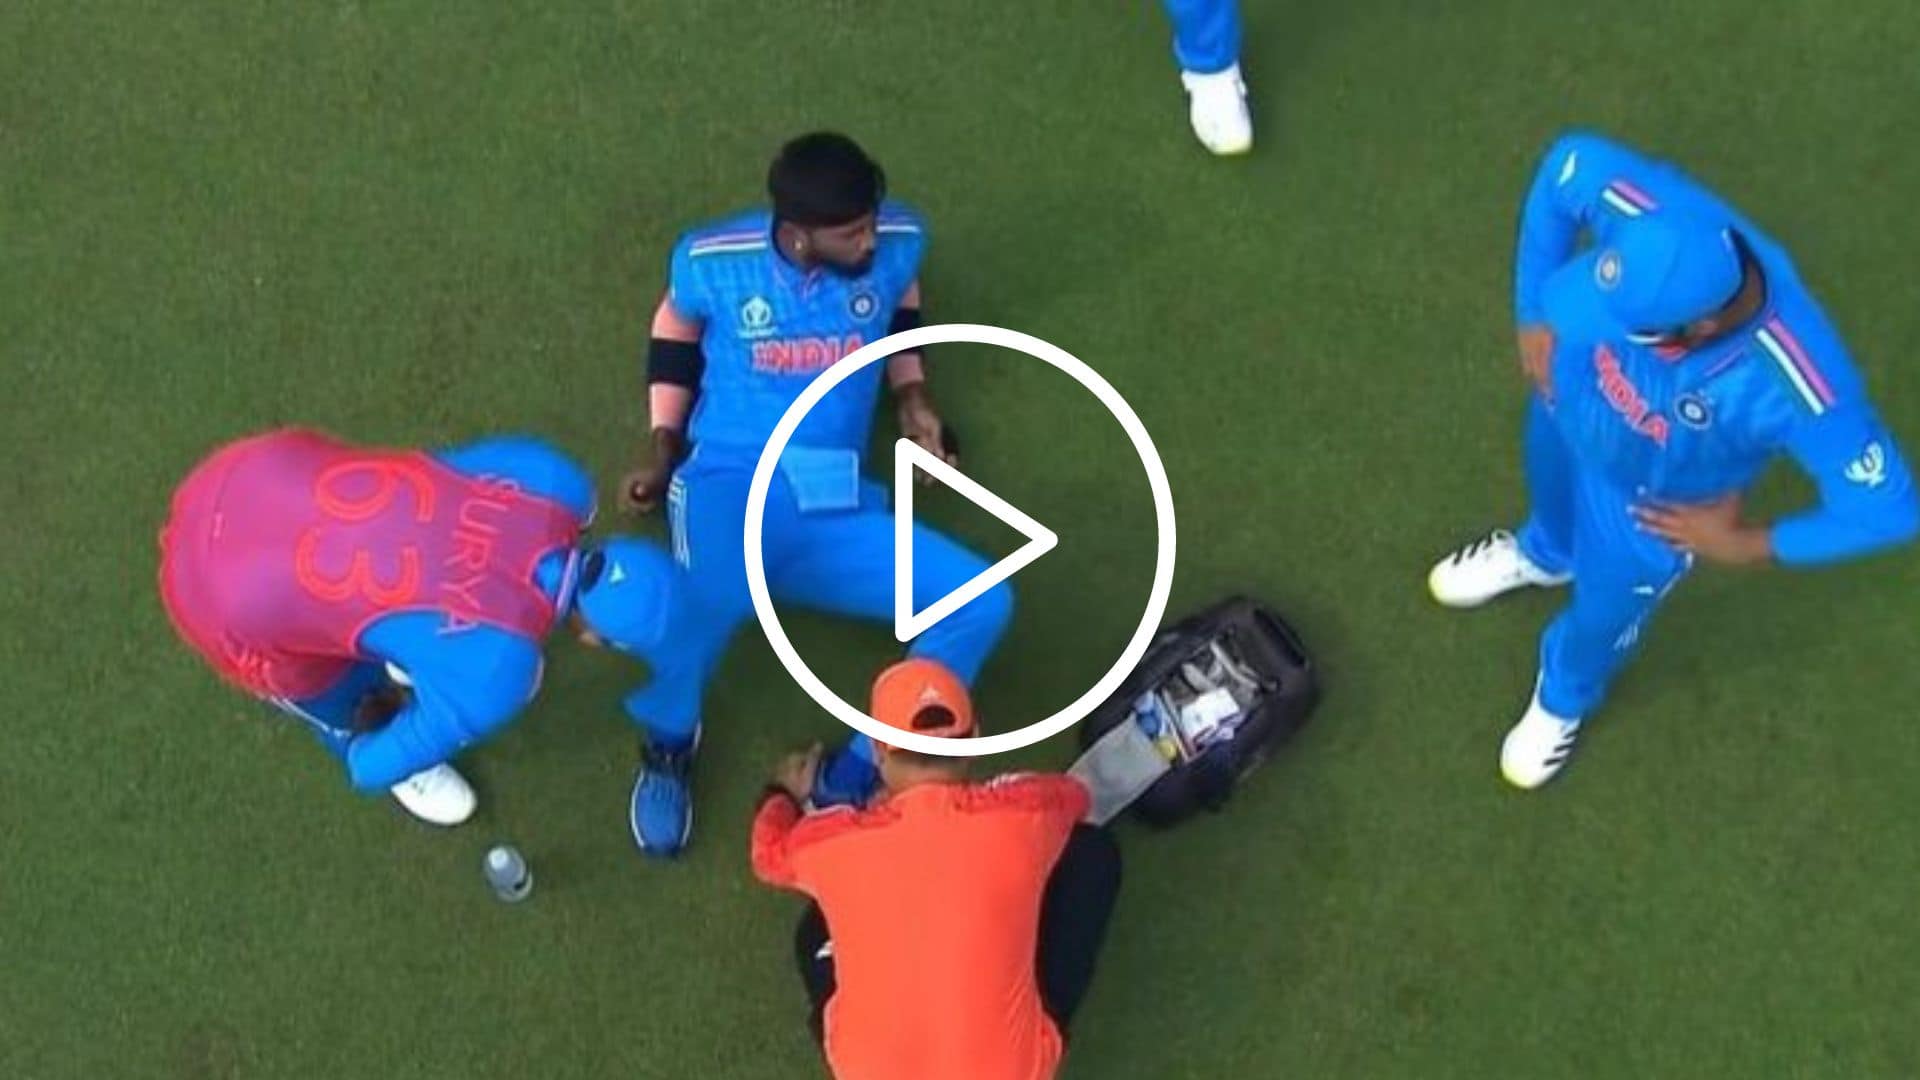 [Watch] Hardik Pandya Ruled Out Of World Cup? Gets Badly Injured vs BAN